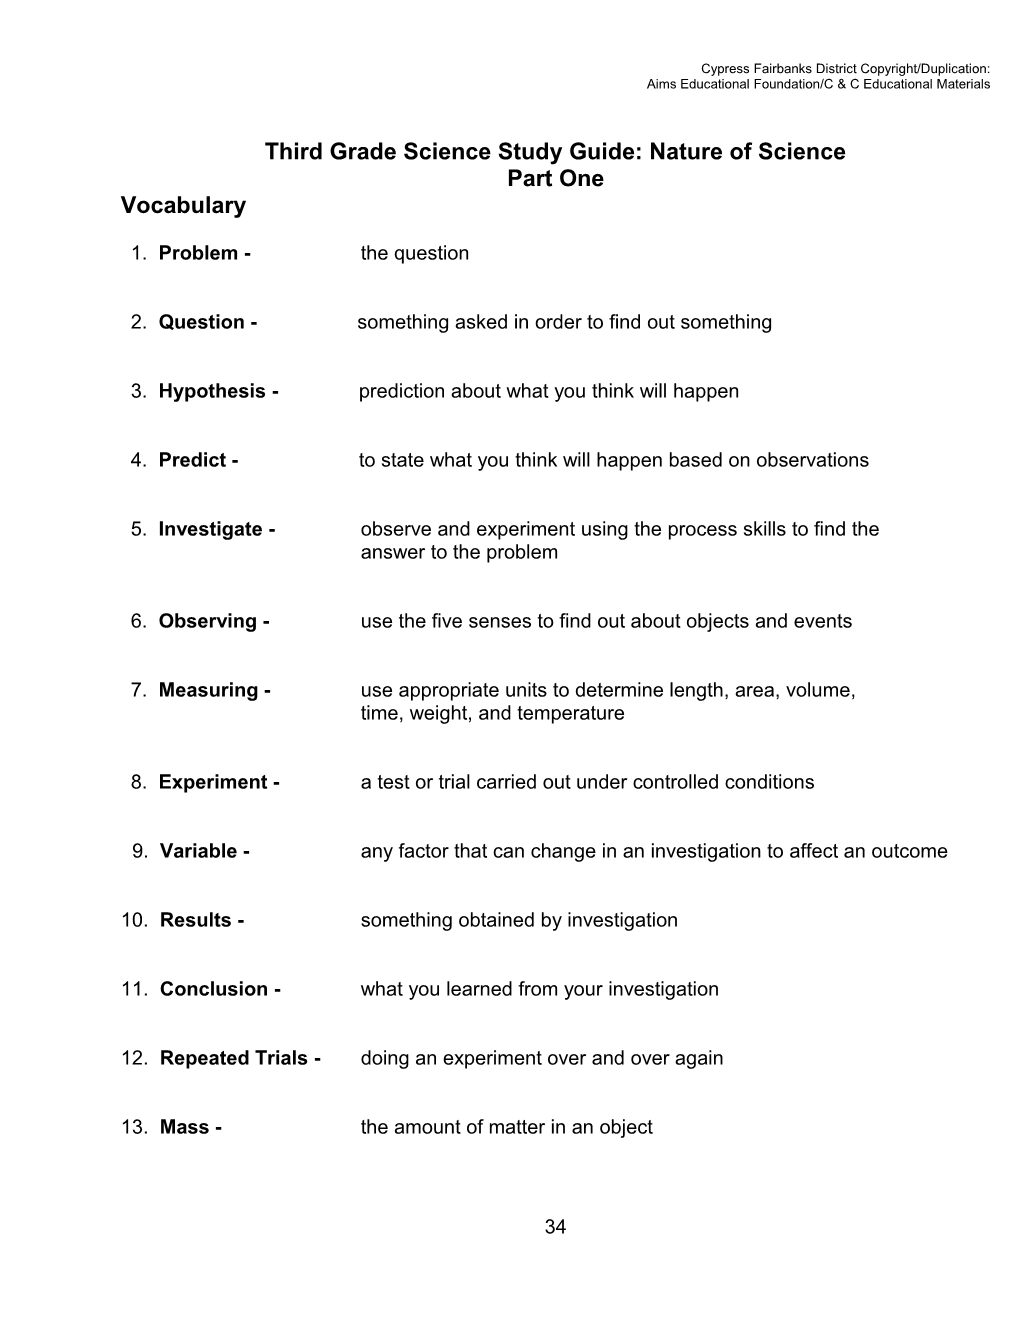 Third Grade Science Study Guide: Nature of Science